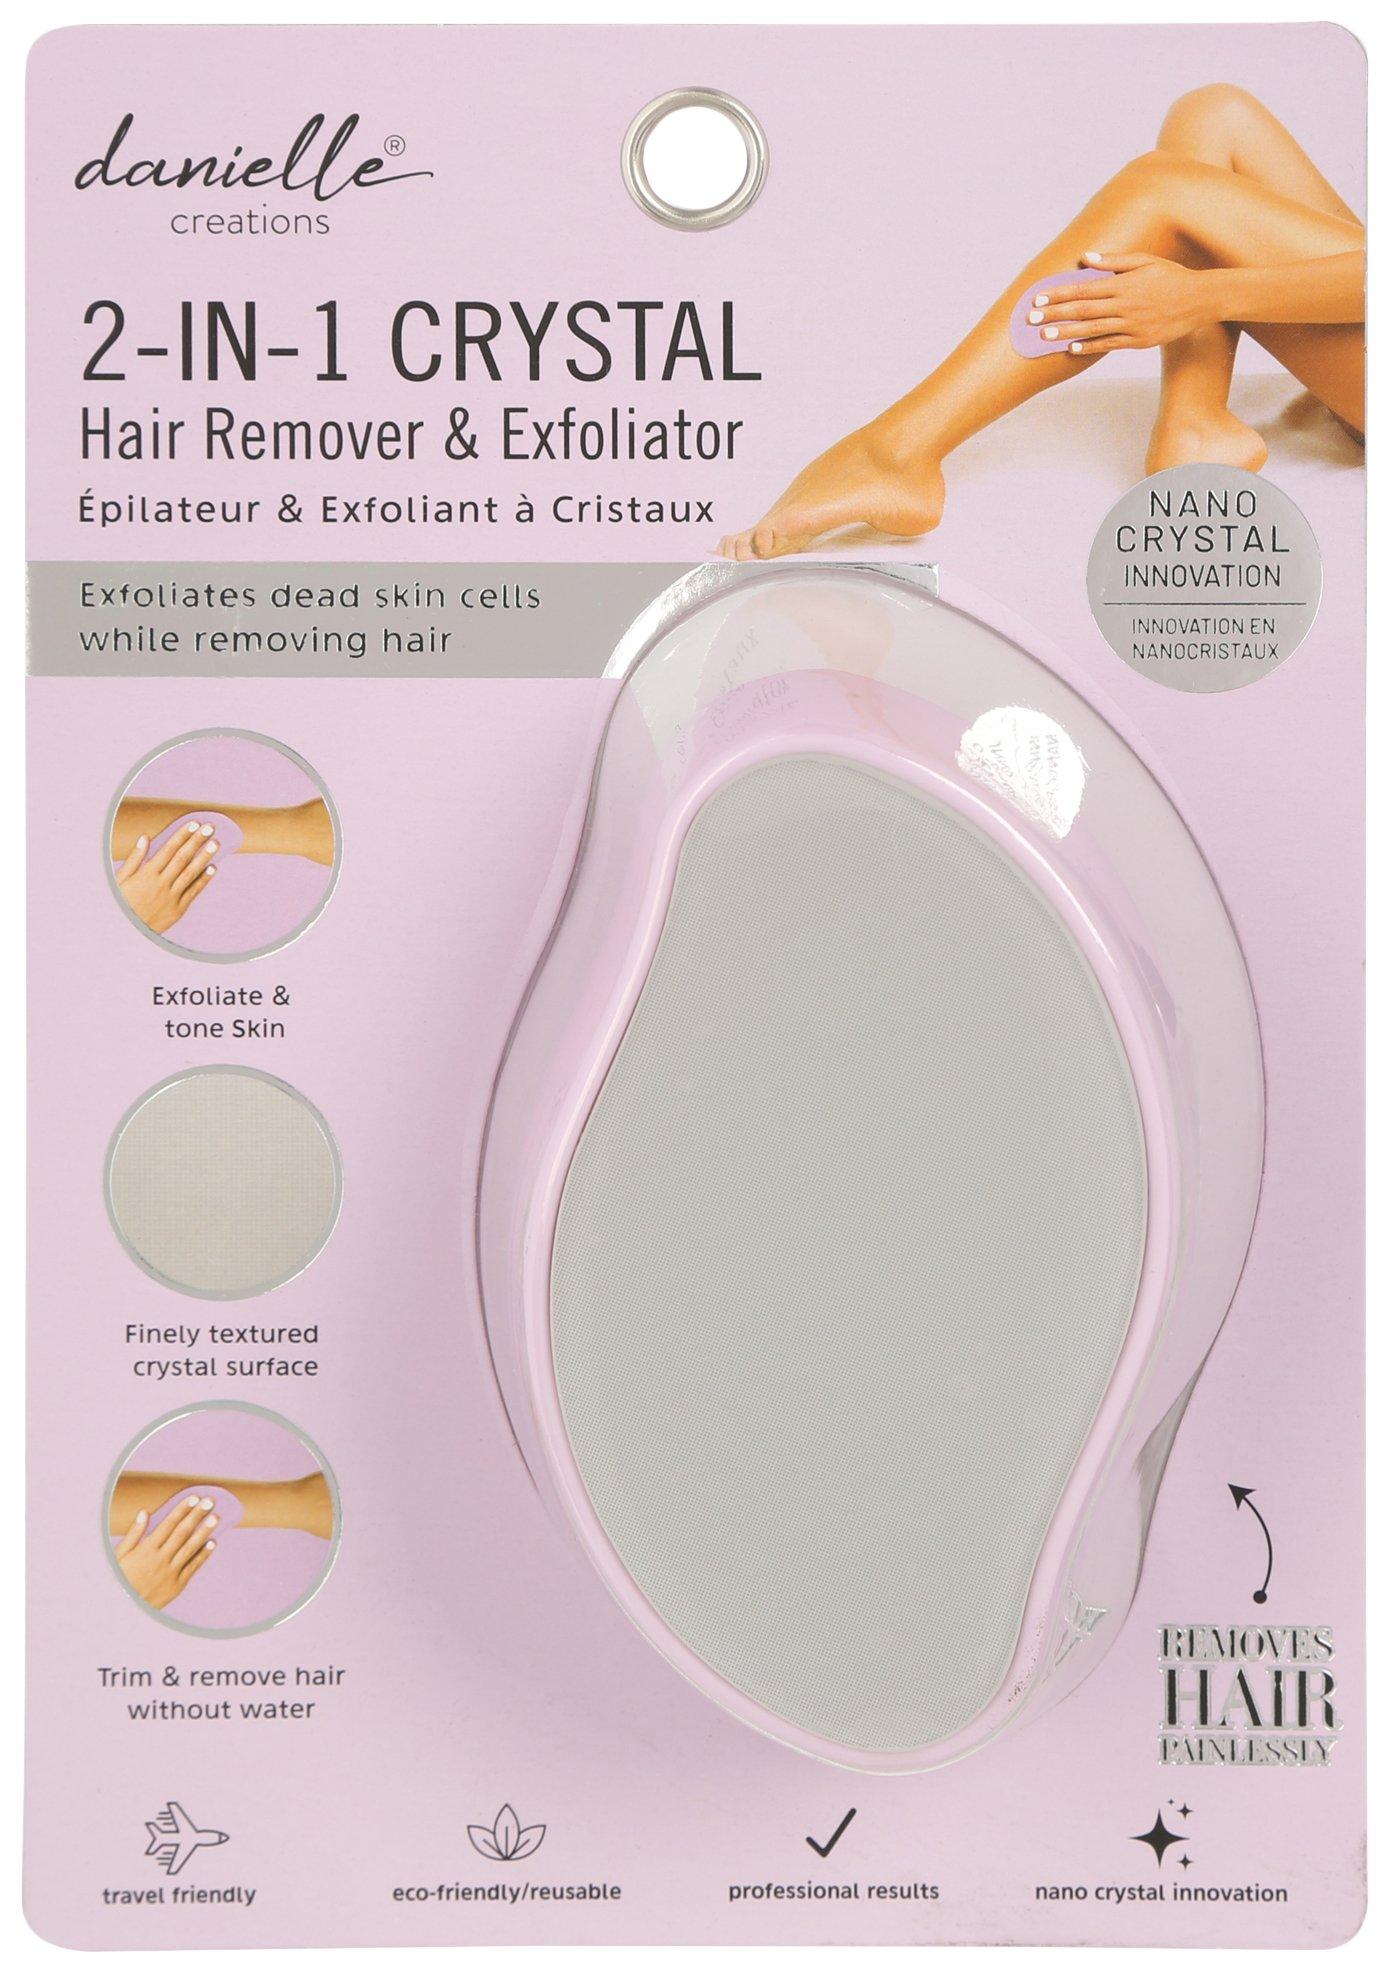 2-In-1 Crystal Hair Remover & Exfoliator